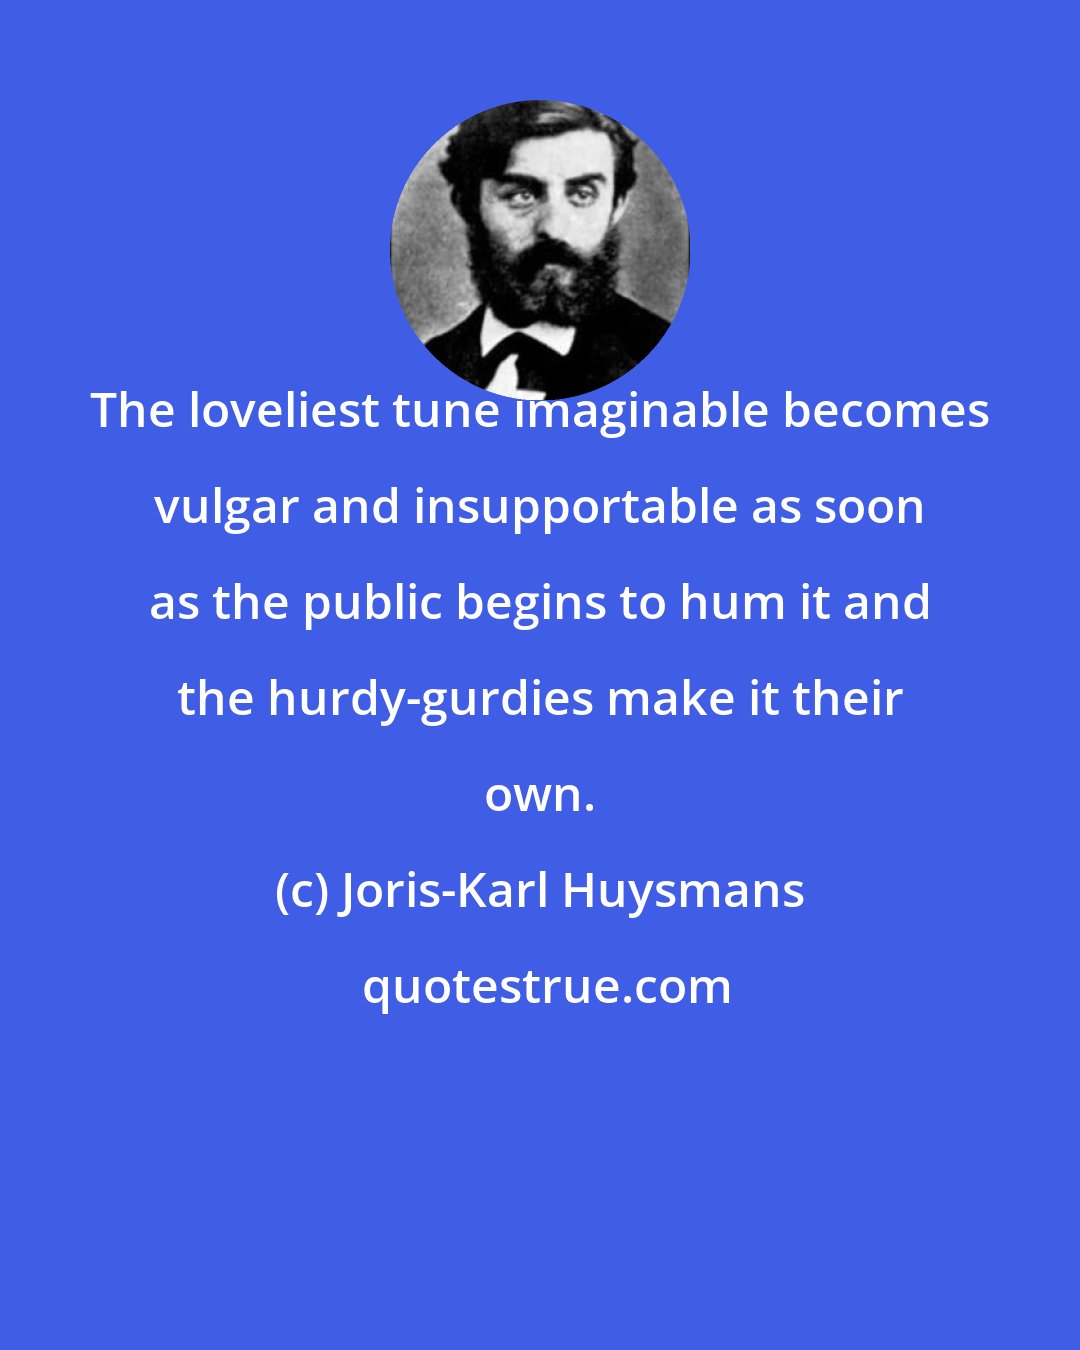 Joris-Karl Huysmans: The loveliest tune imaginable becomes vulgar and insupportable as soon as the public begins to hum it and the hurdy-gurdies make it their own.